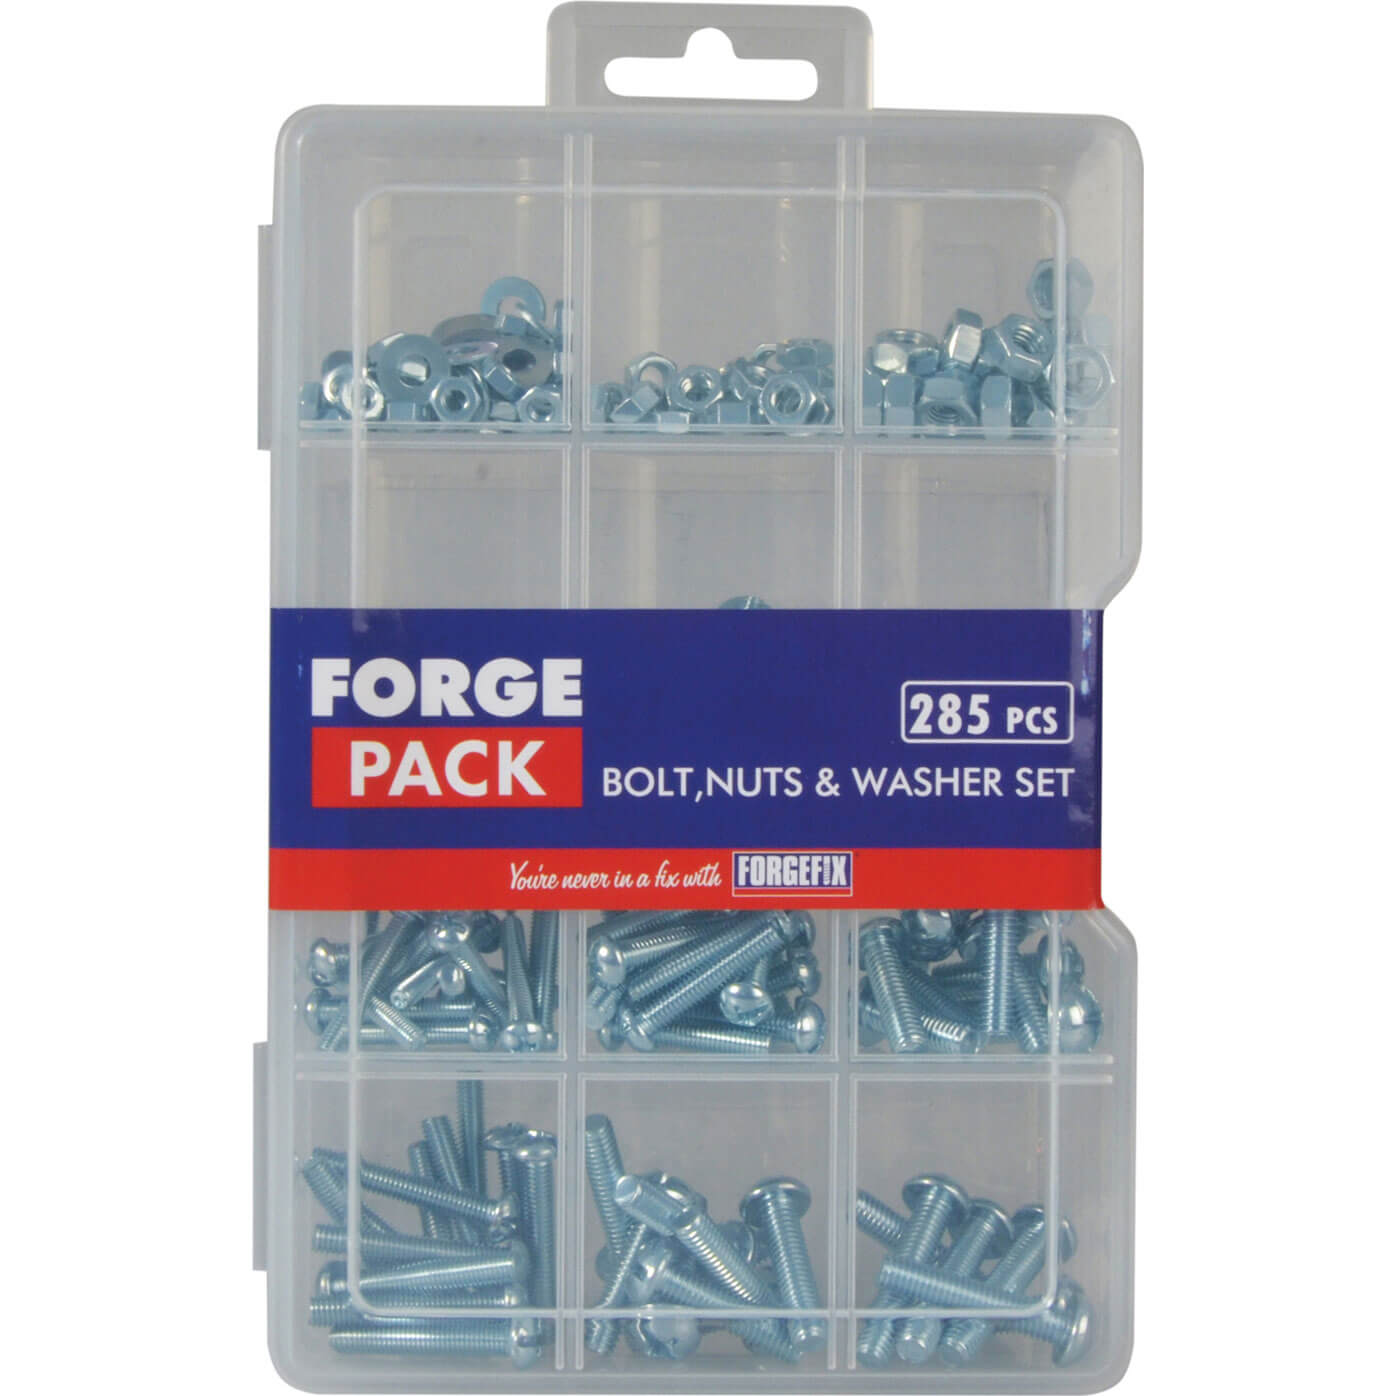 Image of Forgefix Forge Pack 285 Piece Bolt, Nut and Washer Set